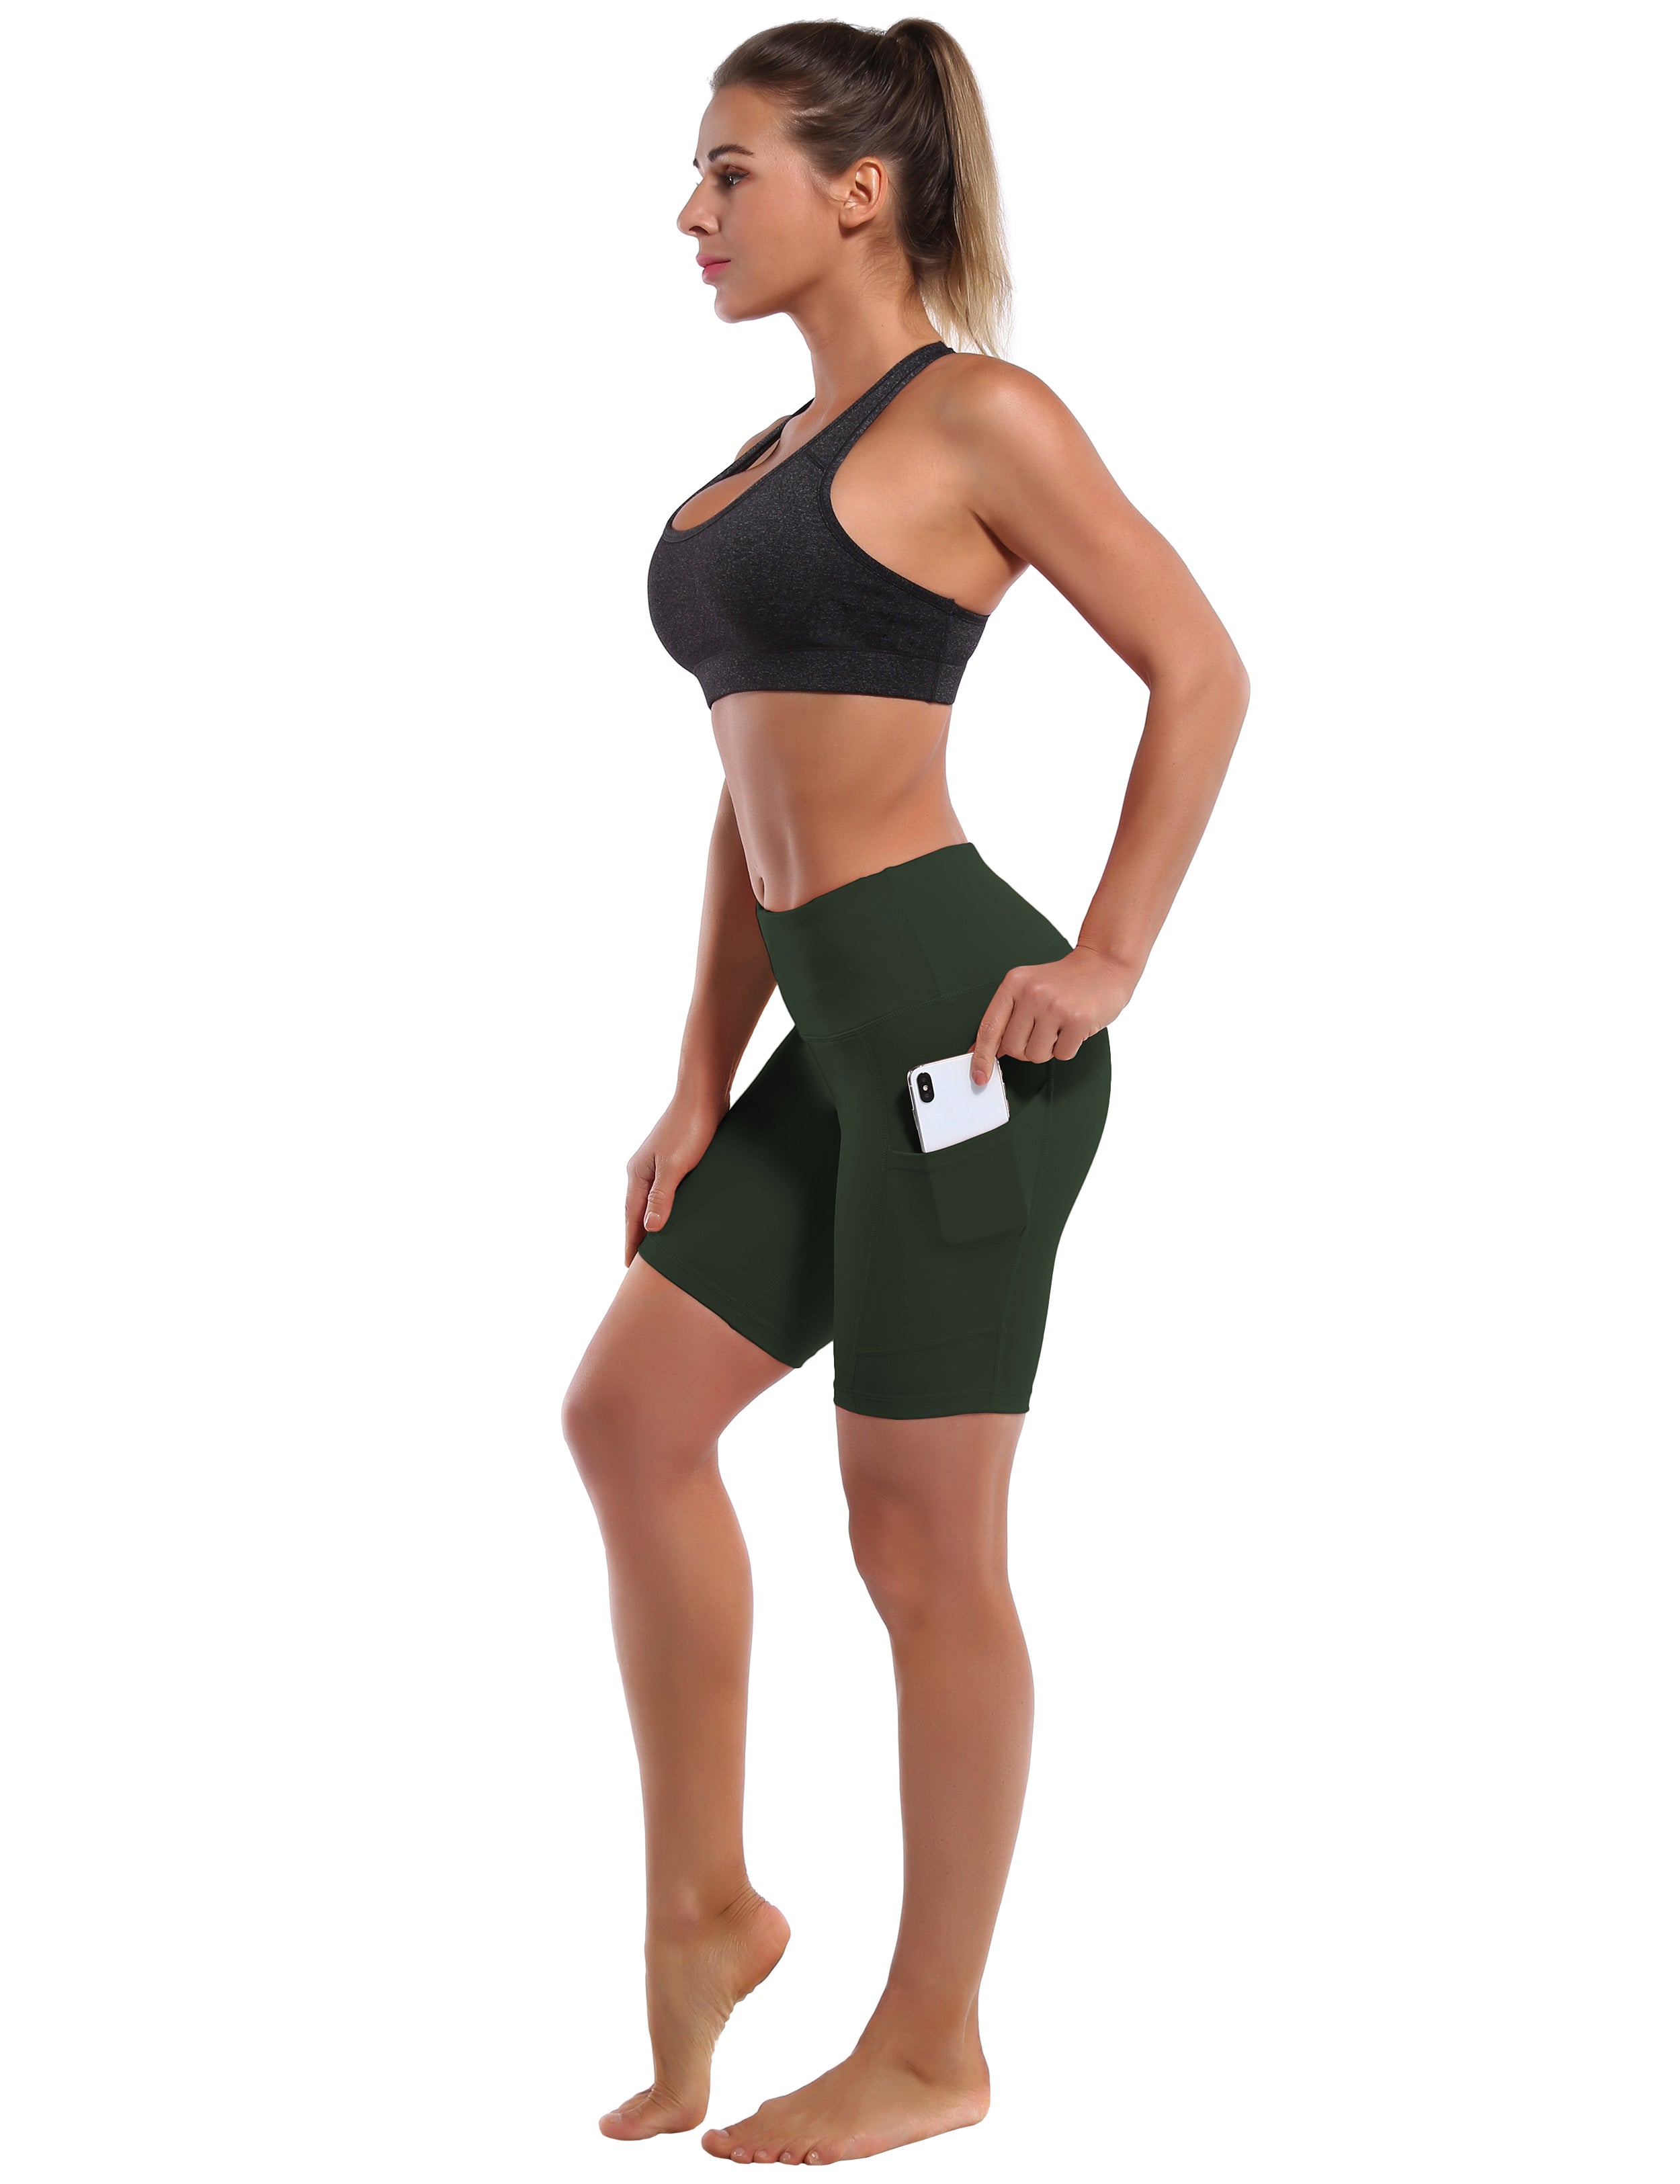 8" Side Pockets yogastudio Shorts olivegray Sleek, soft, smooth and totally comfortable: our newest style is here. Softest-ever fabric High elasticity High density 4-way stretch Fabric doesn't attract lint easily No see-through Moisture-wicking Machine wash 75% Nylon, 25% Spandex